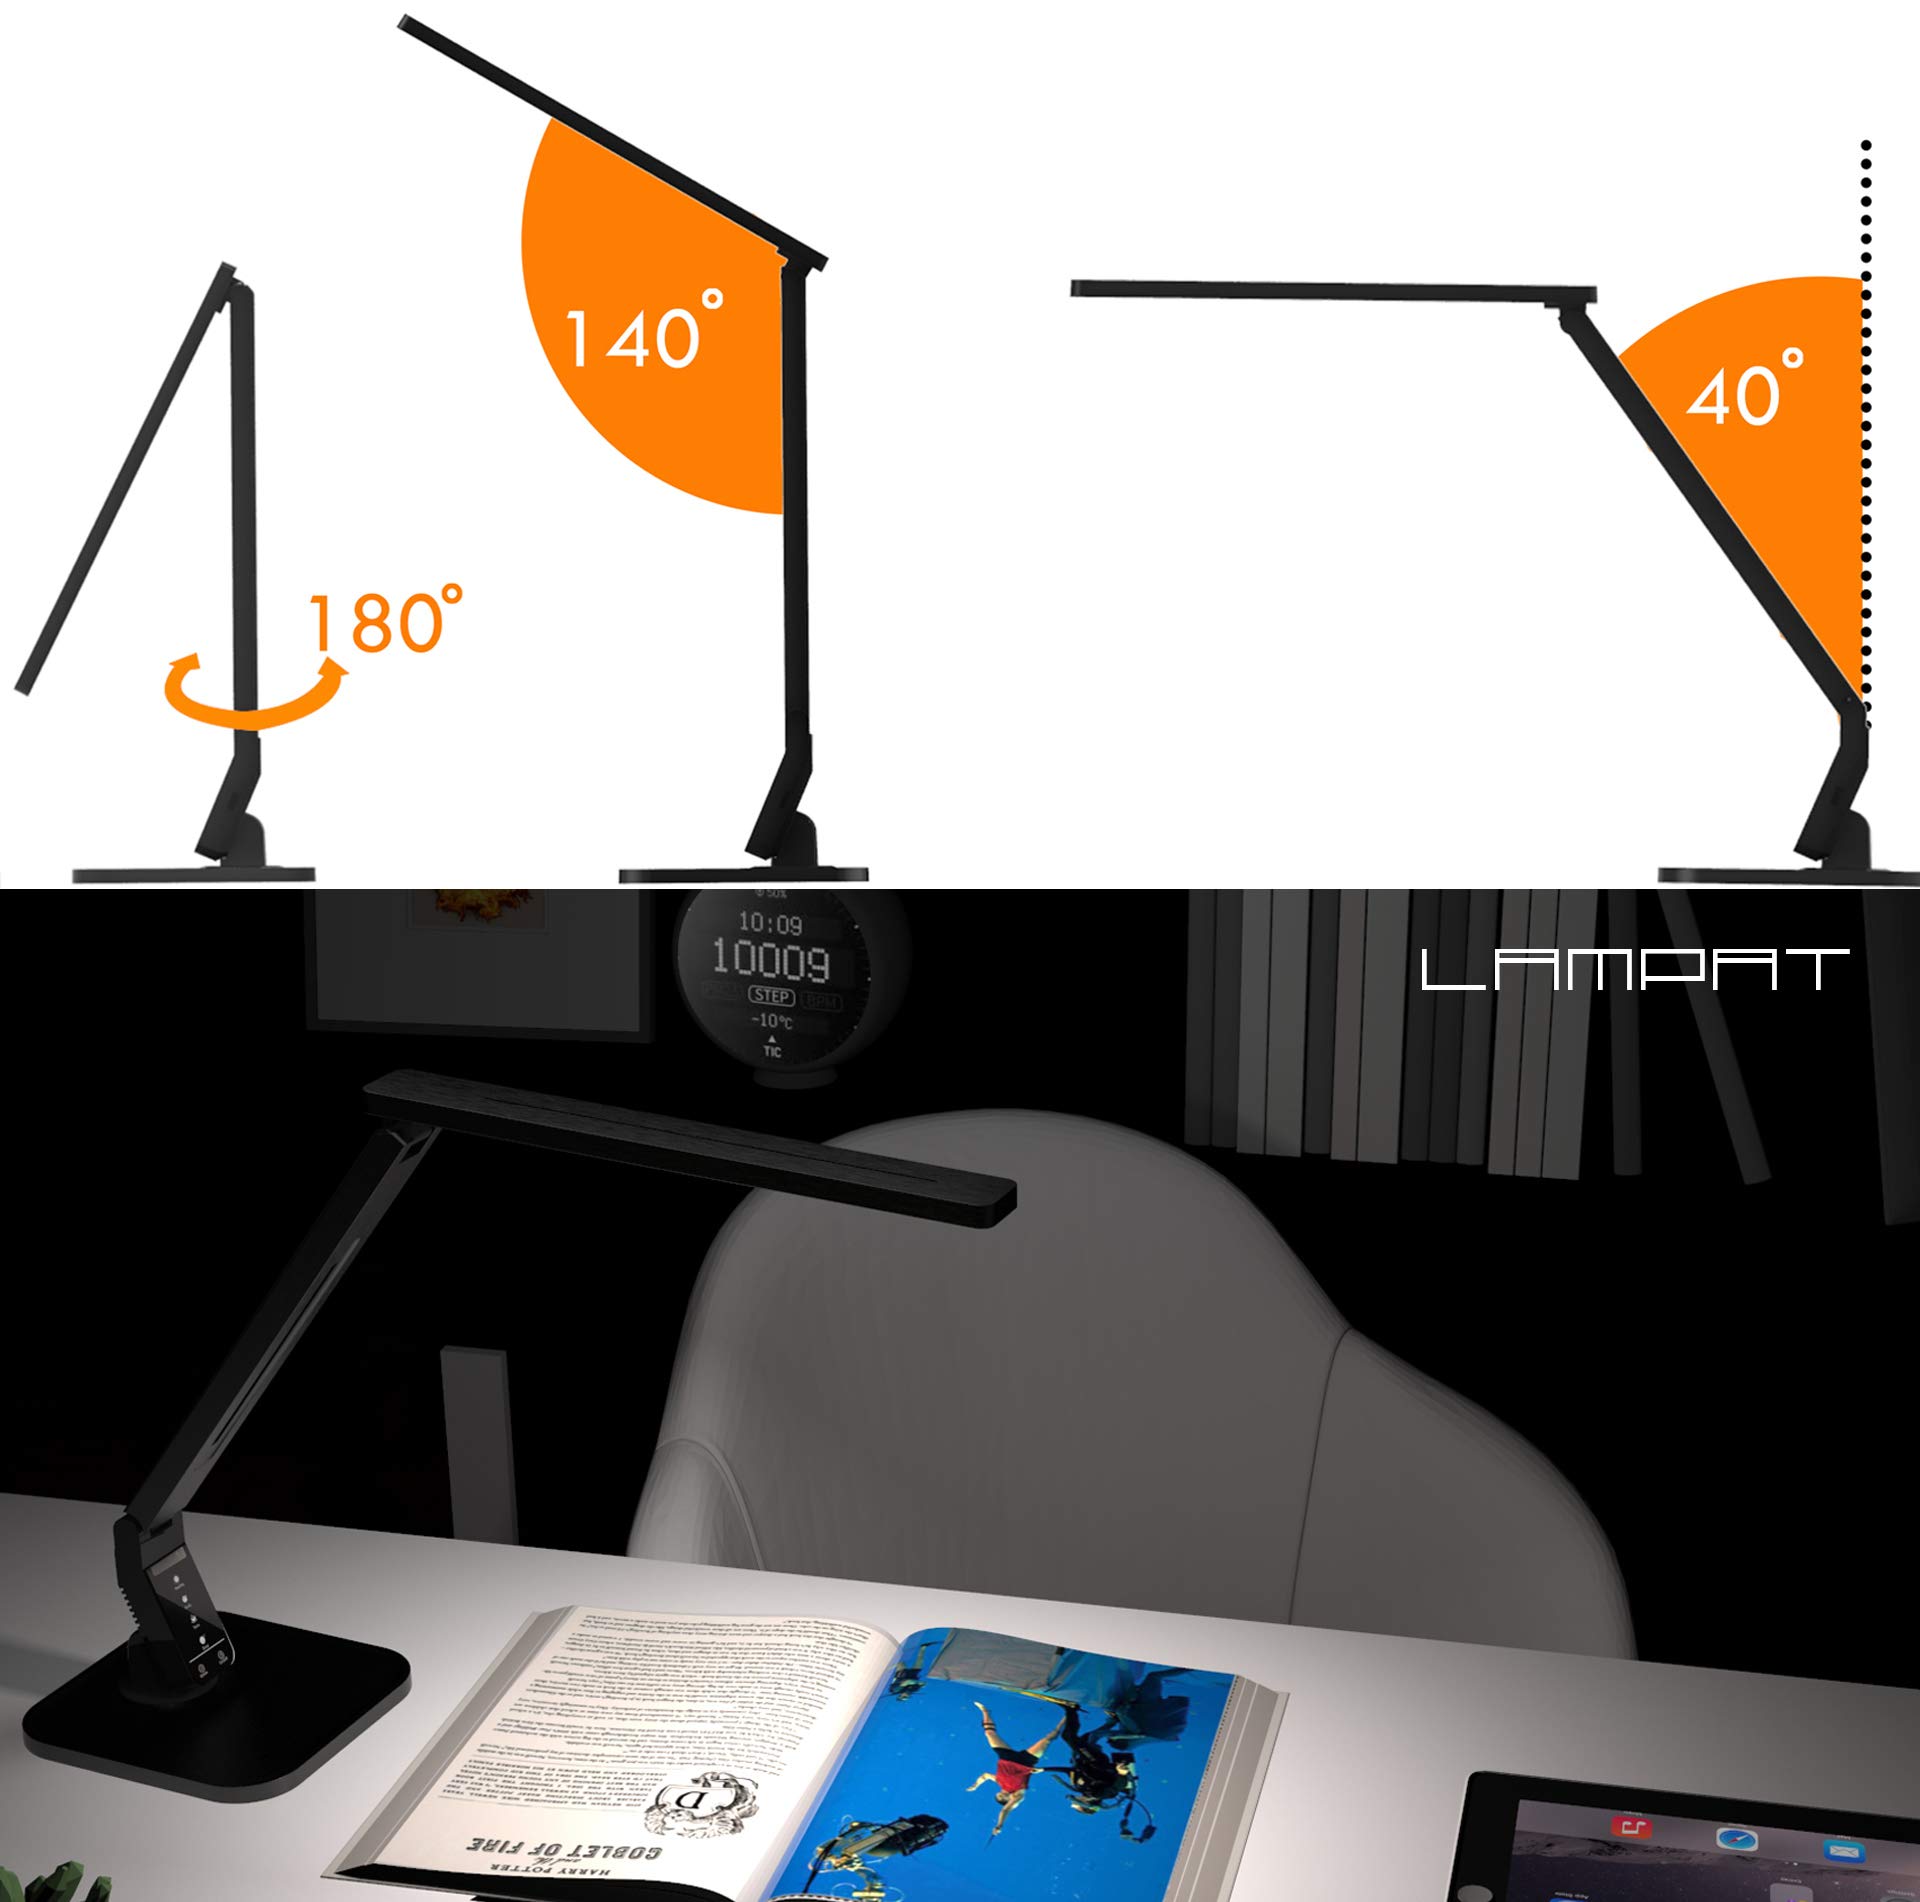 Lampat Dimmable LED Desk Lamp, 4 Lighting Modes (Reading/Studying/Relaxation/Bedtime), 5-Level Dimmer, Touch-Sensitive Control Panel, 1-Hour Auto Timer, 5V/1A USB Charging Port, Piano Black